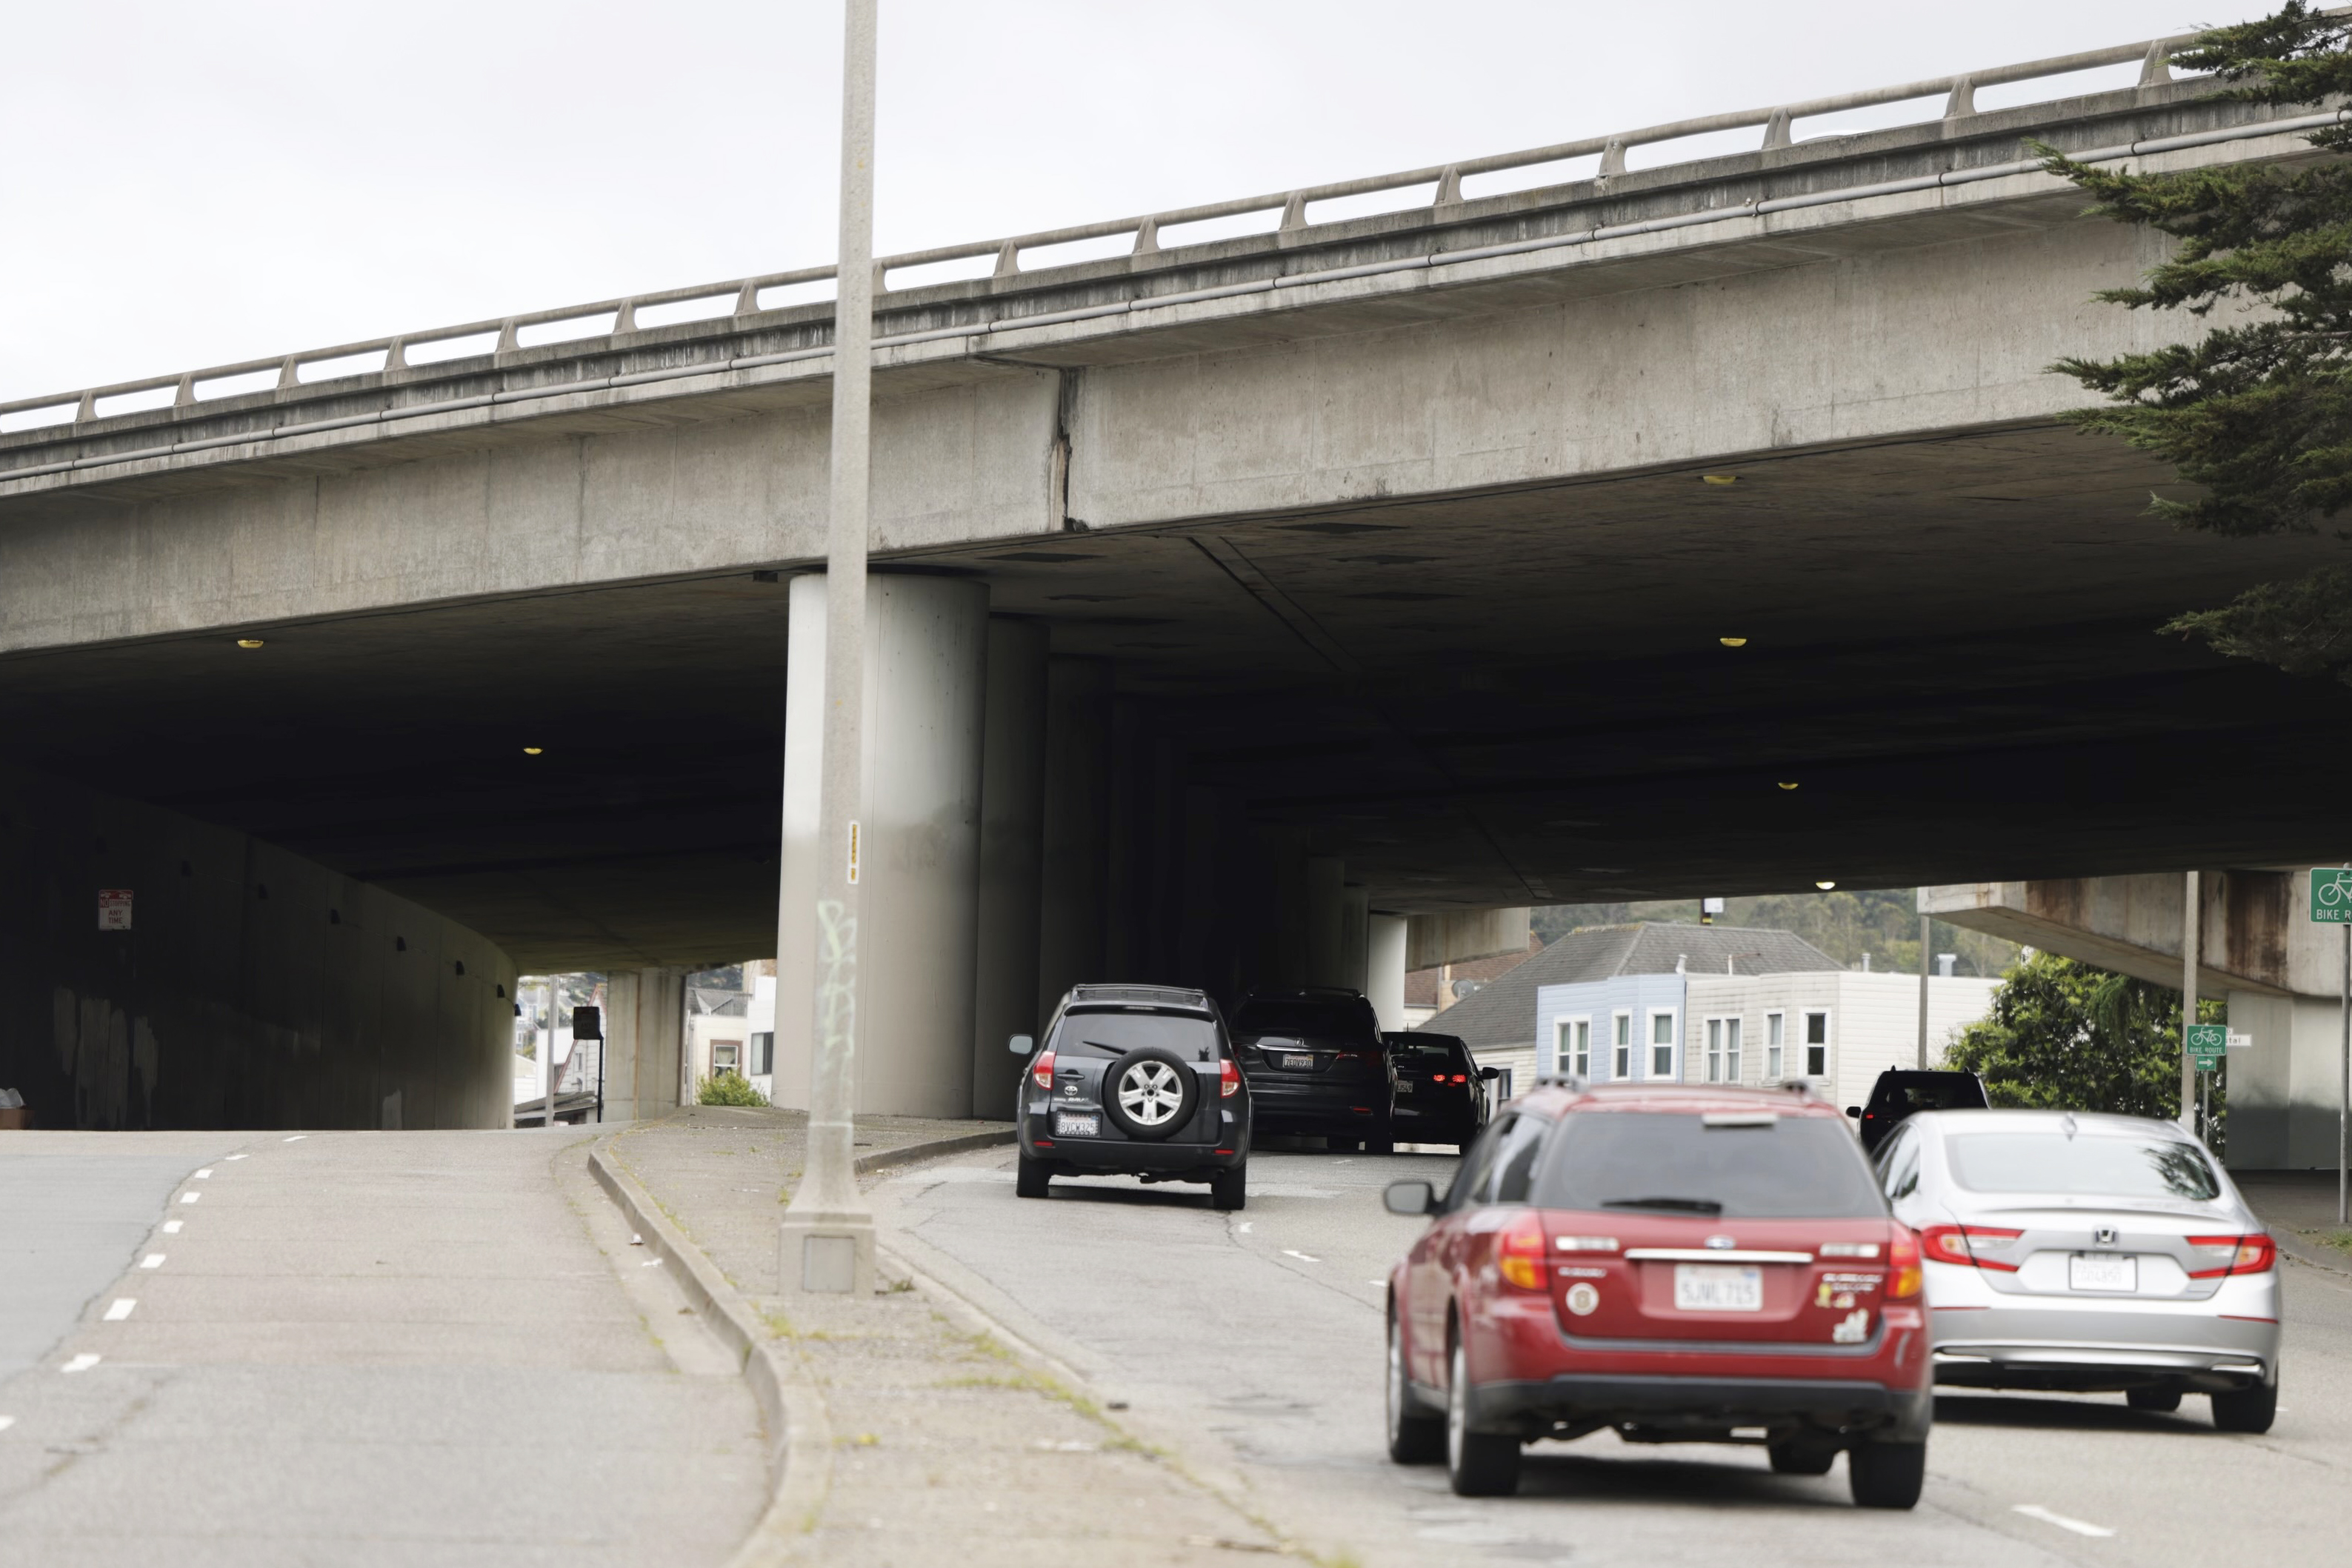 Cars drive under a concrete overpass with small patches of graffiti.